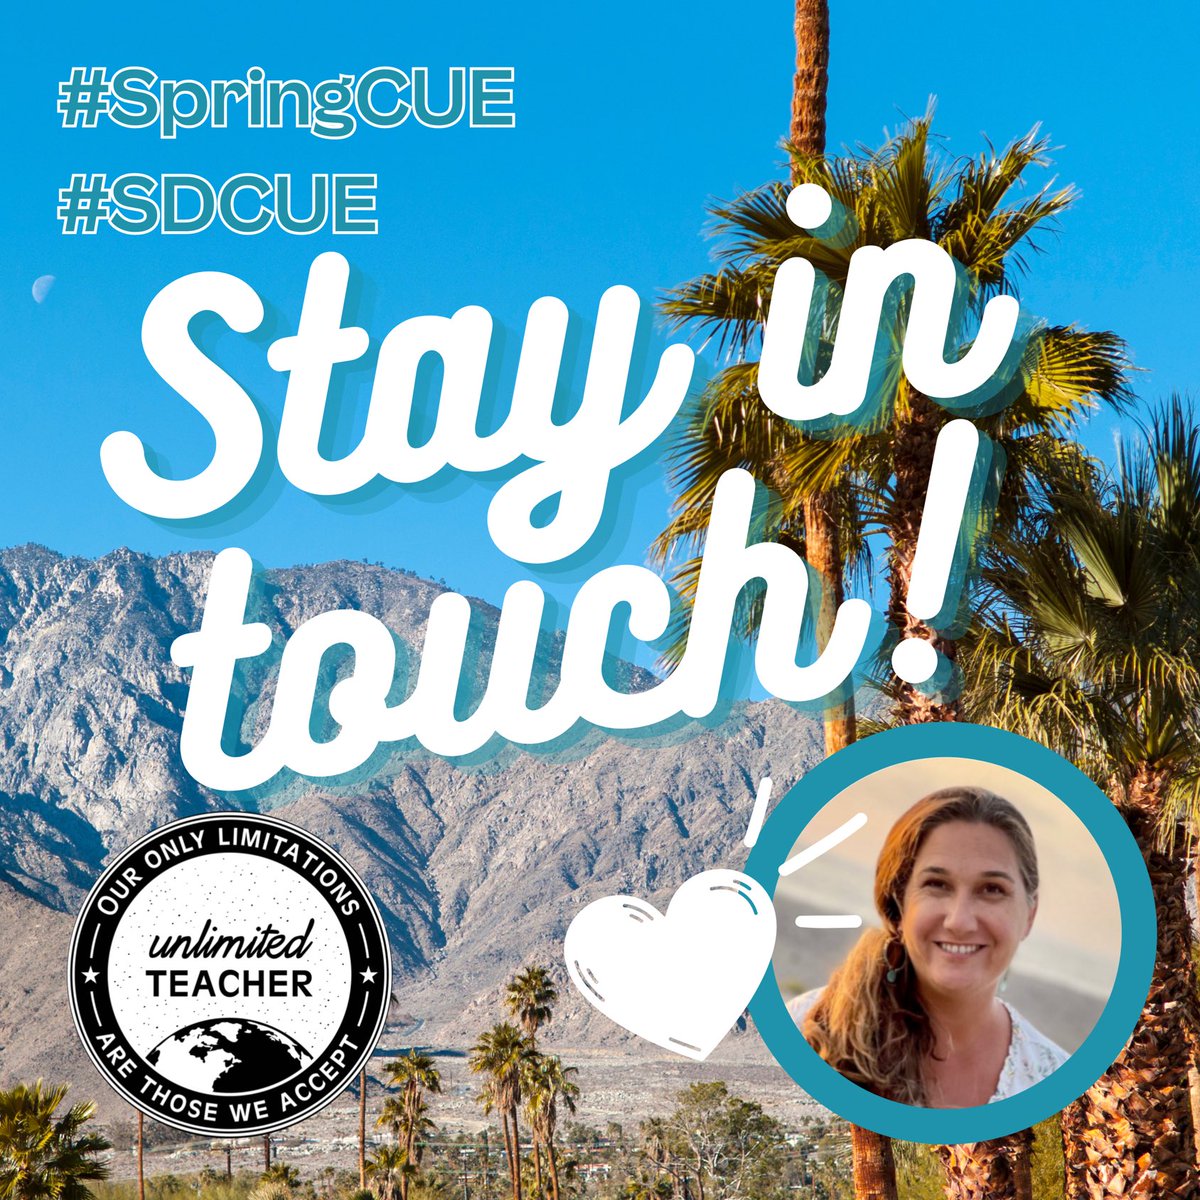 What a fantastic weekend!! 

Let’s follow each other and keep the energy and connection going!

QUESTION: What’s one tip, trick, tool, or highlight from these past three days? 

#TQE #UnlimitedTeacher #SDCUE #SpringCUE #TeachDifferently #CUEmmunity